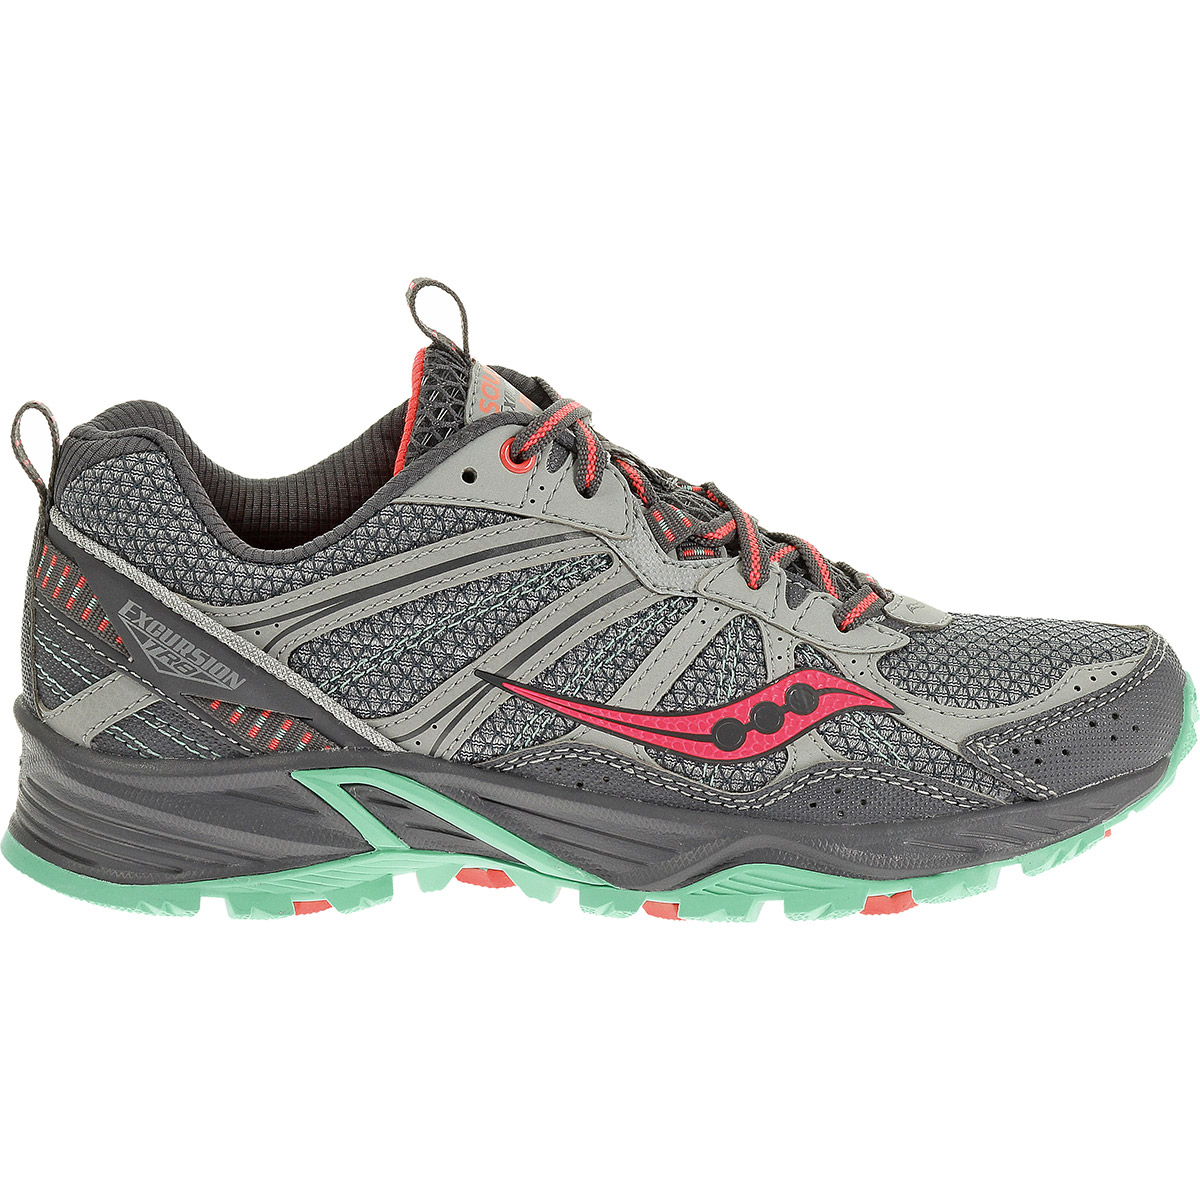 saucony grid excursion tr8 trail running shoe